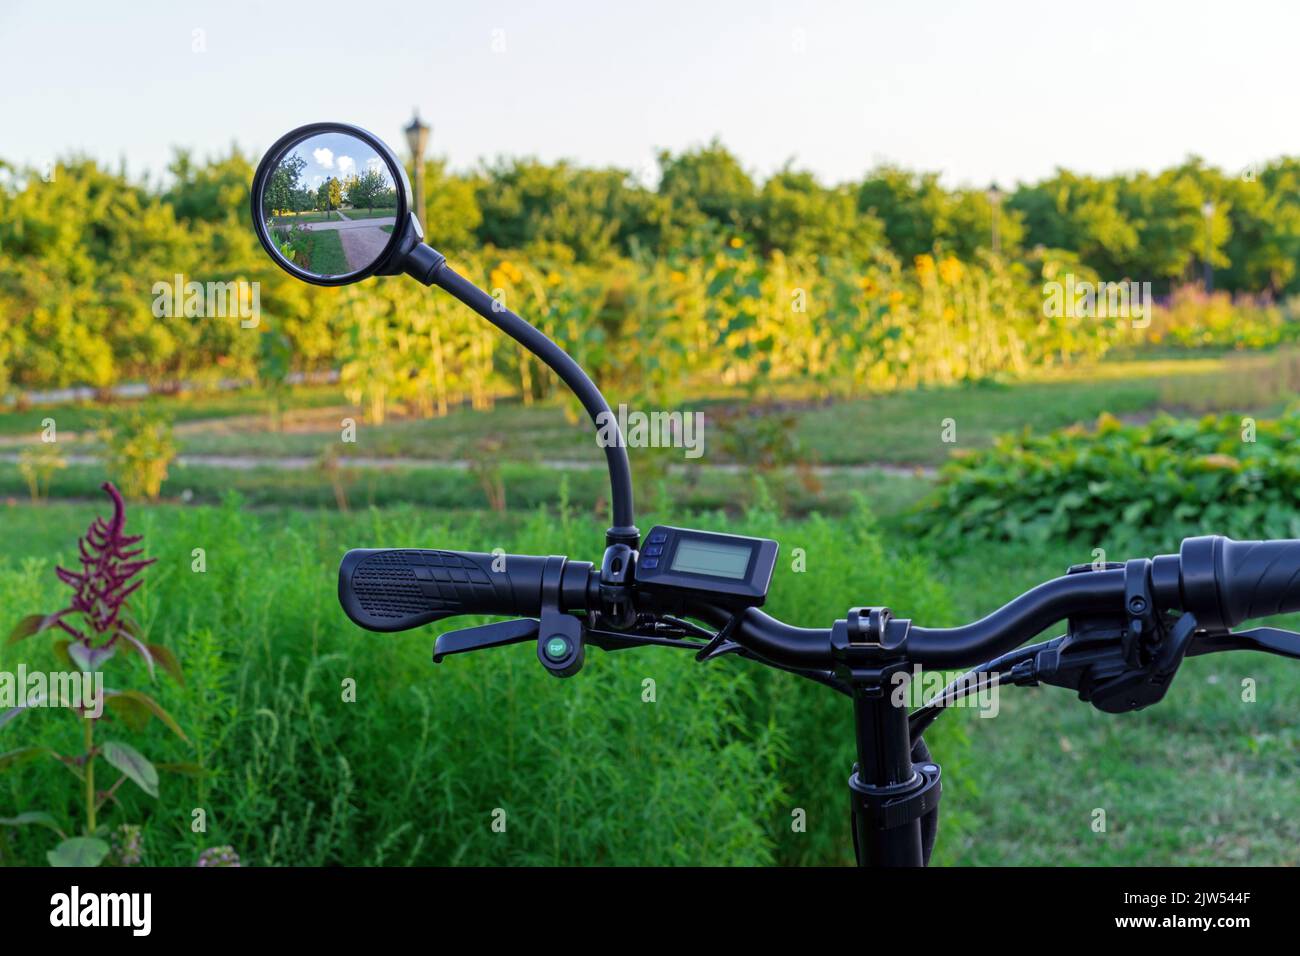 Bicycle rear view mirror with nature reflection. Stock Photo